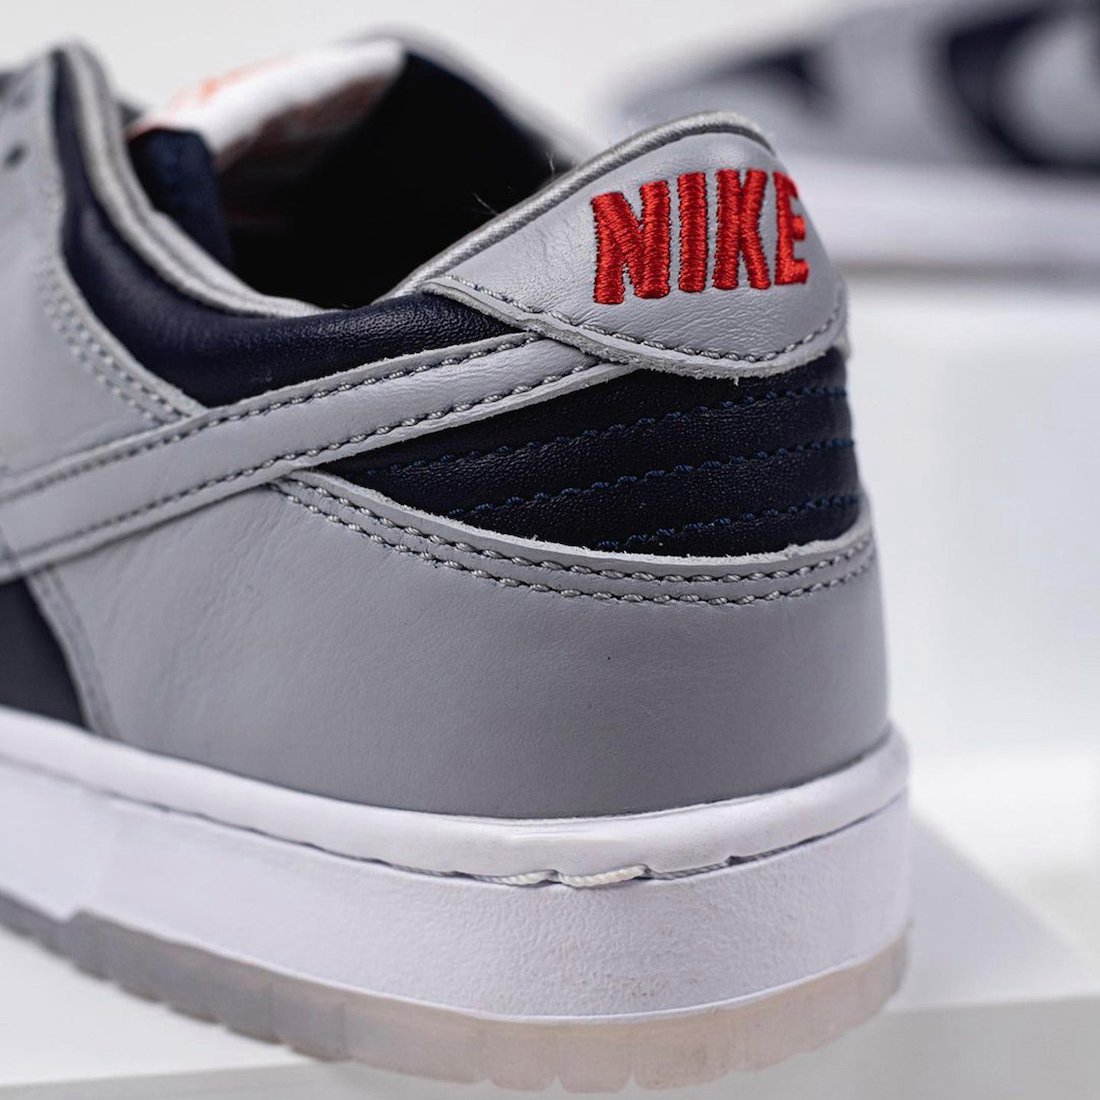 Nike Dunk Low Grey Black Silver Red Release Date Info